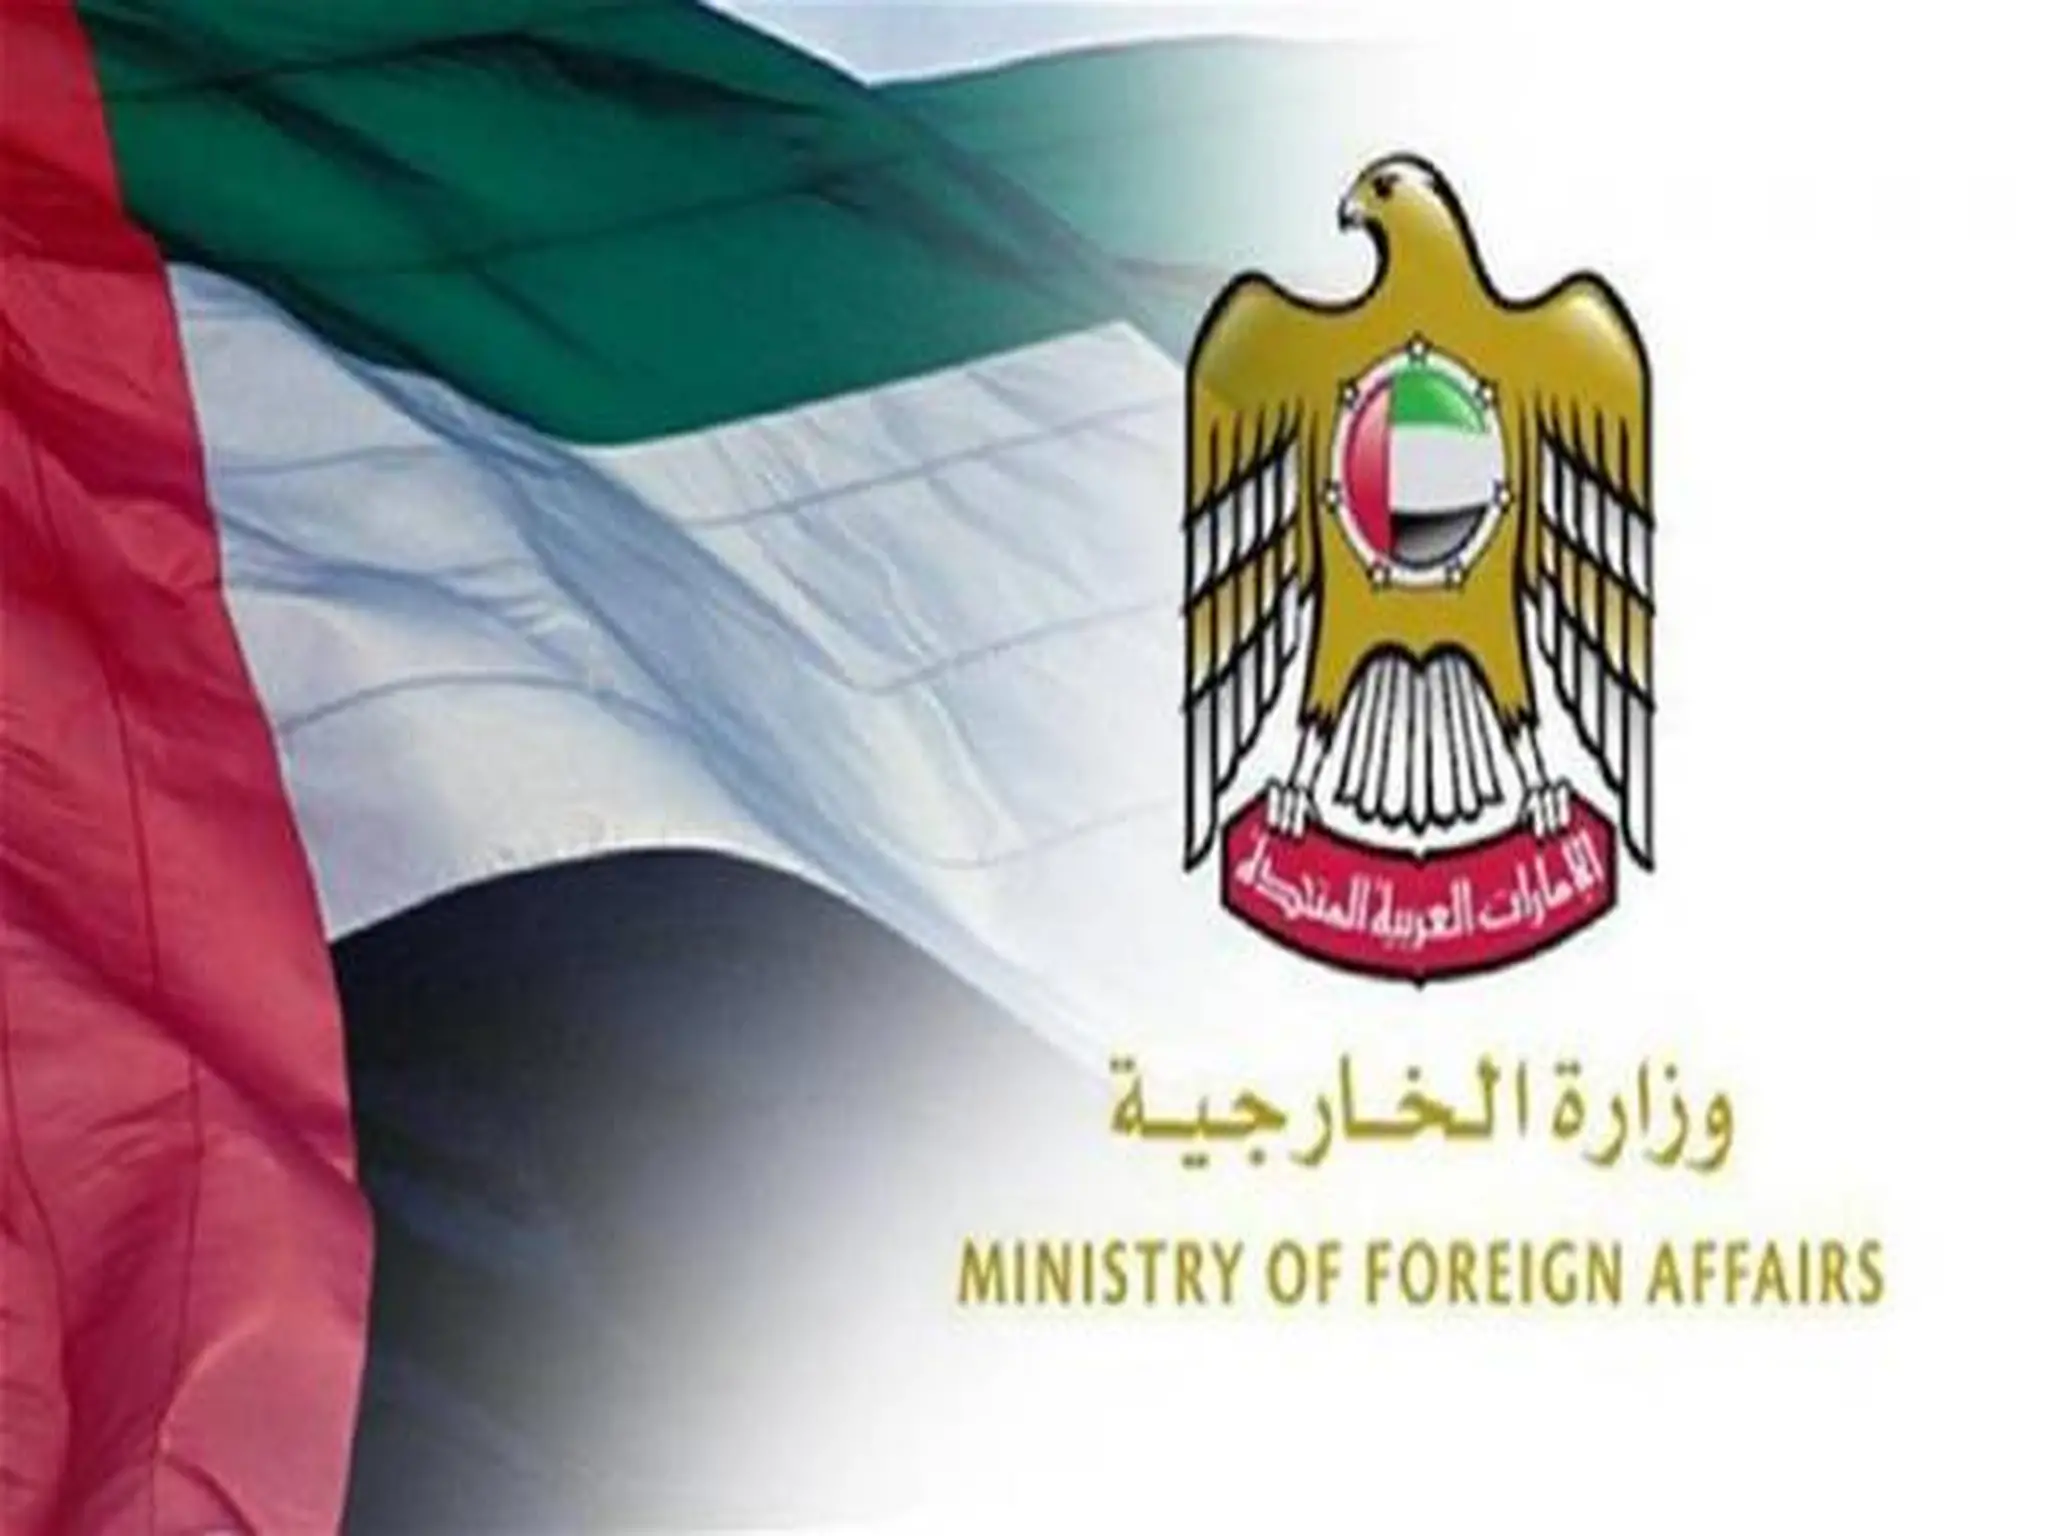 An urgent statement from the UAE Ministry of Foreign Affairs to all citizens and expatriates